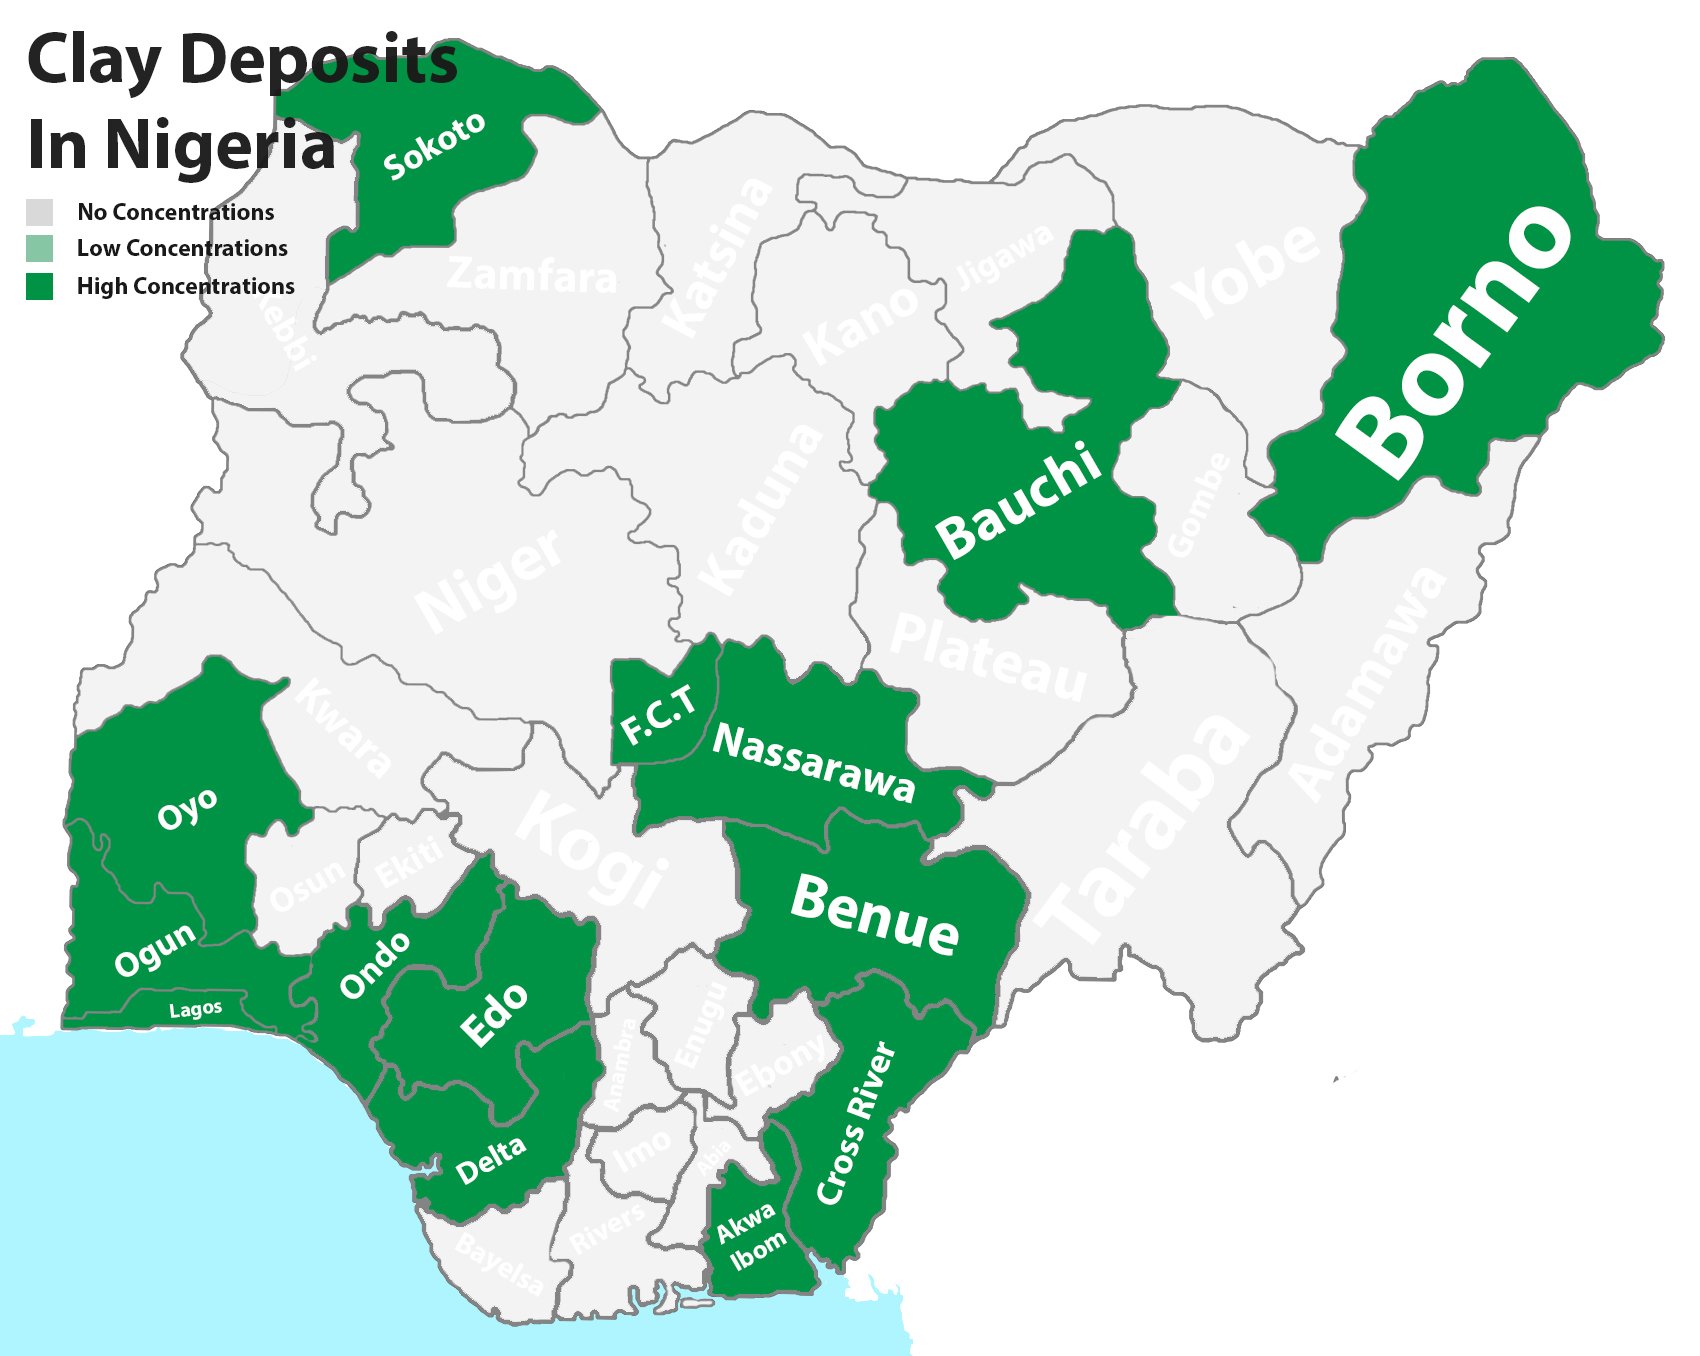 Clay mineral deposits in Nigeria